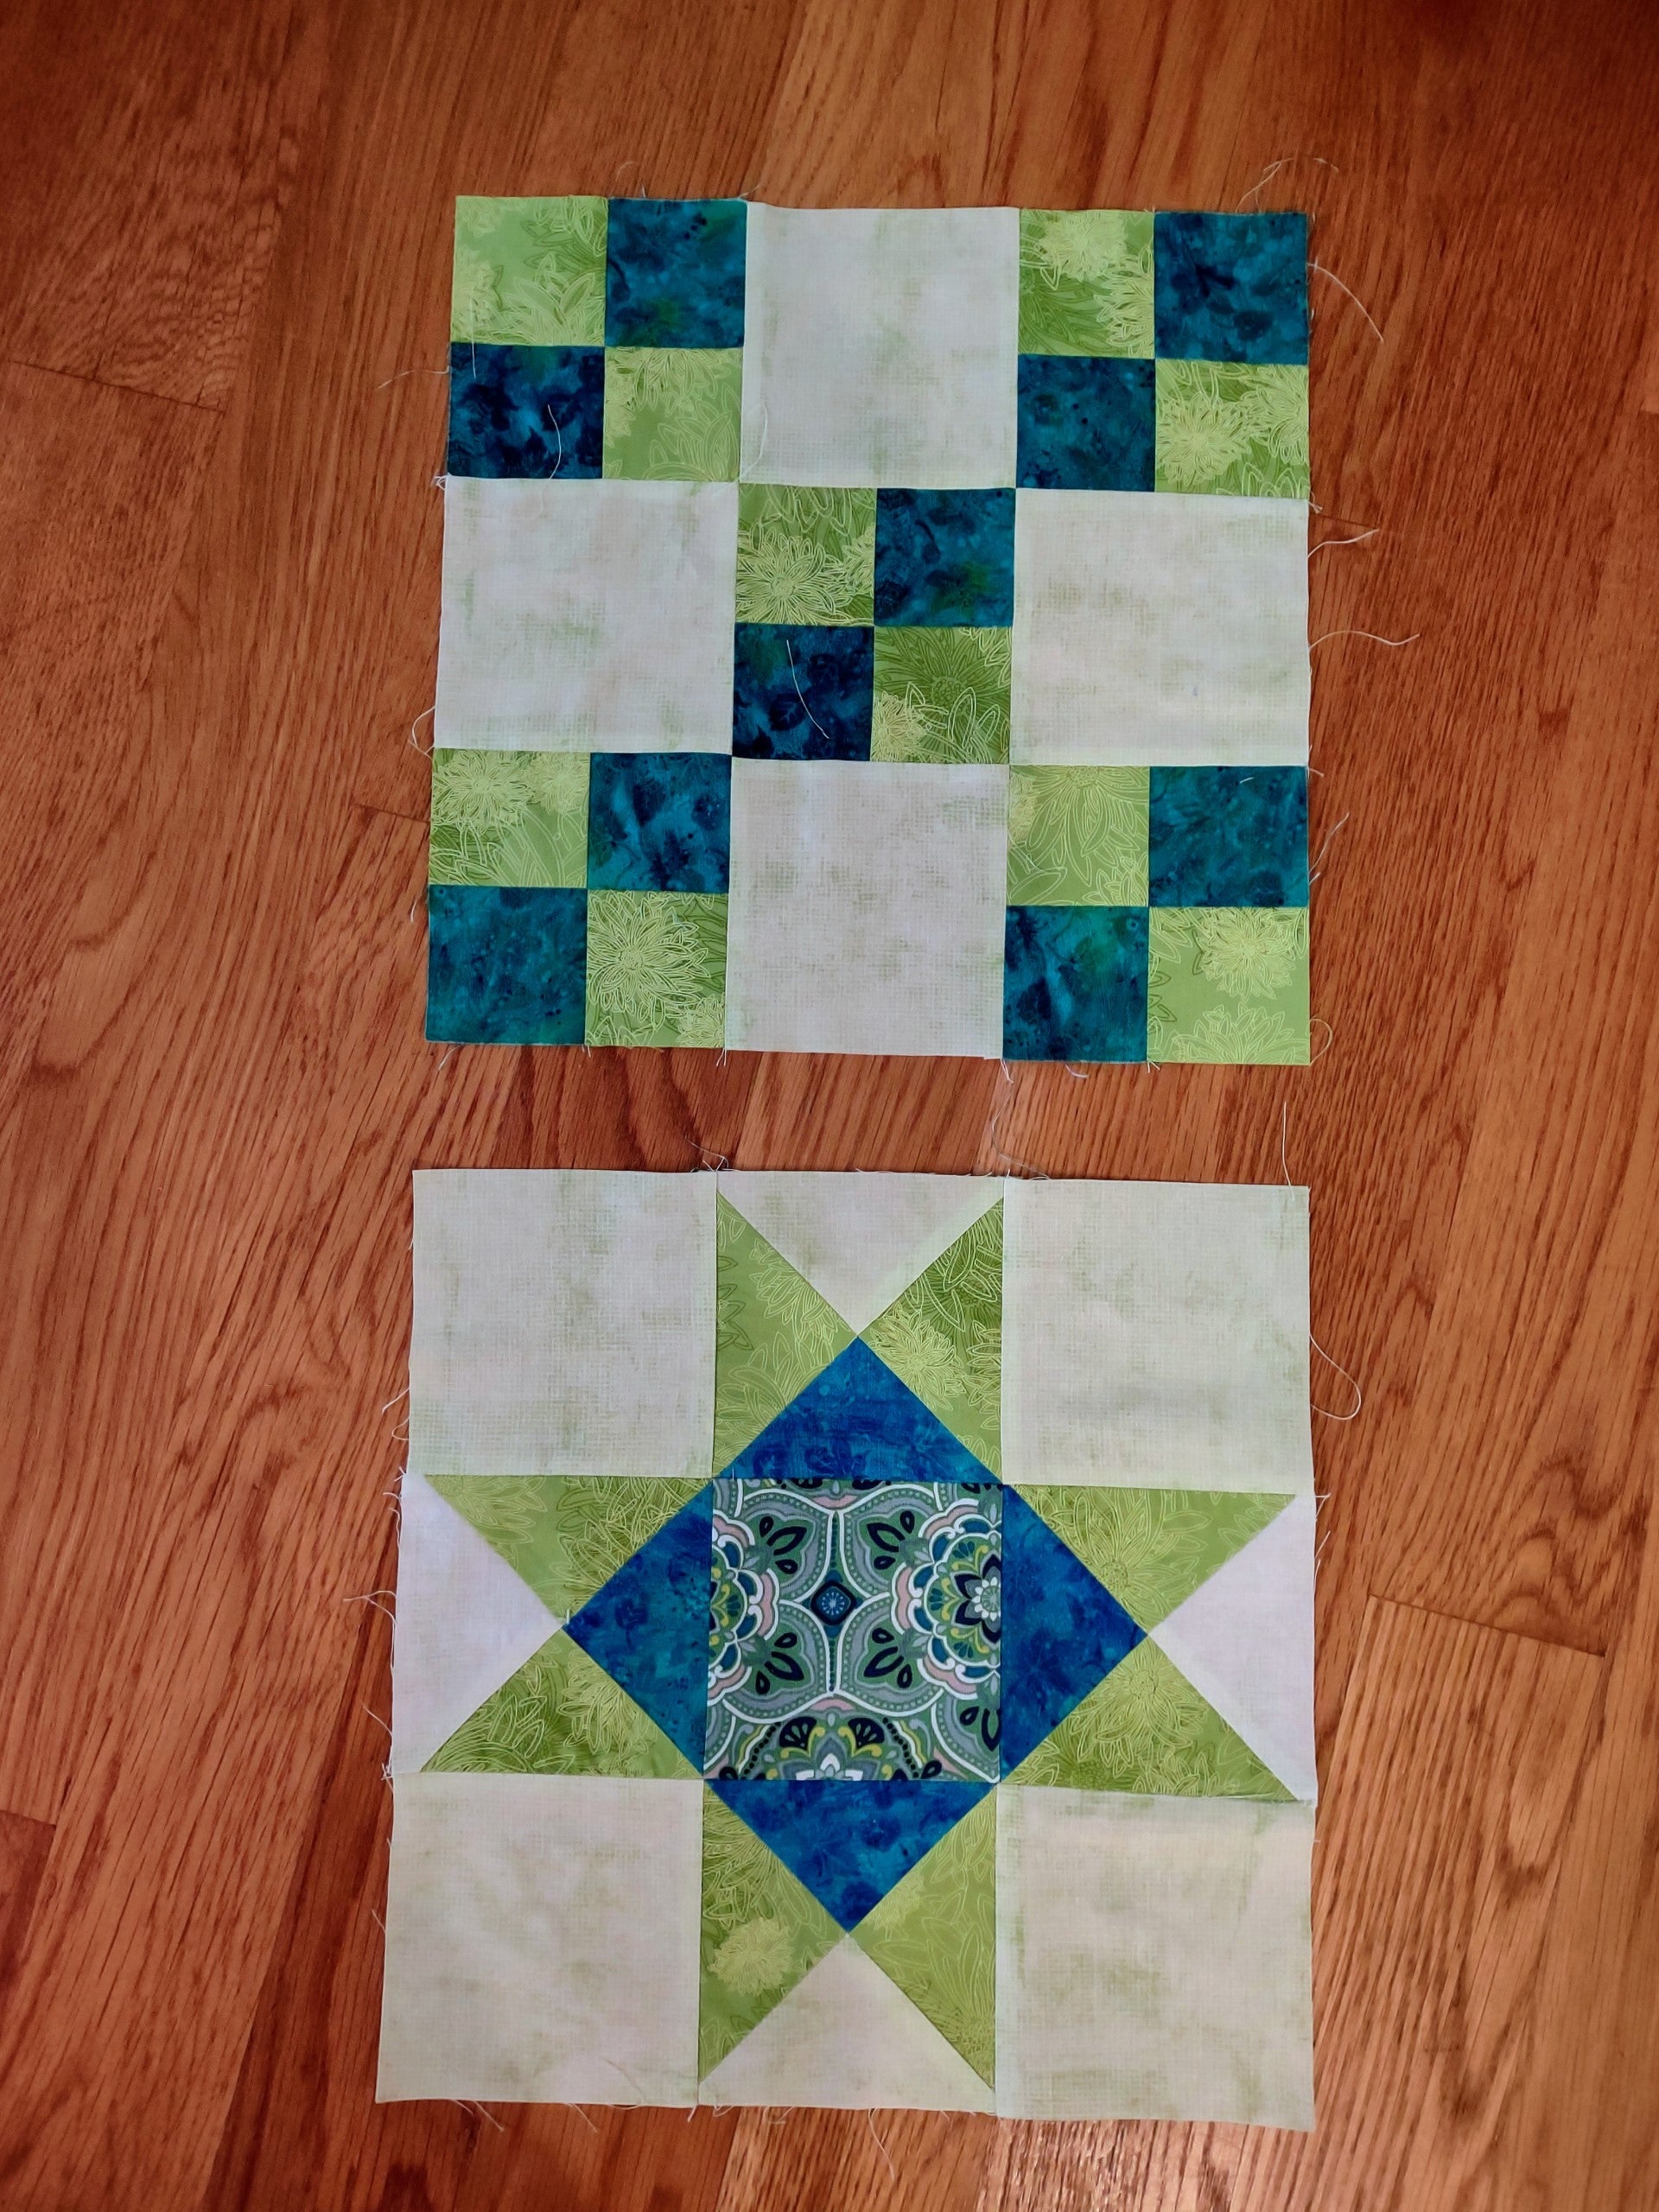 Beginning Quilting Class with Marnet